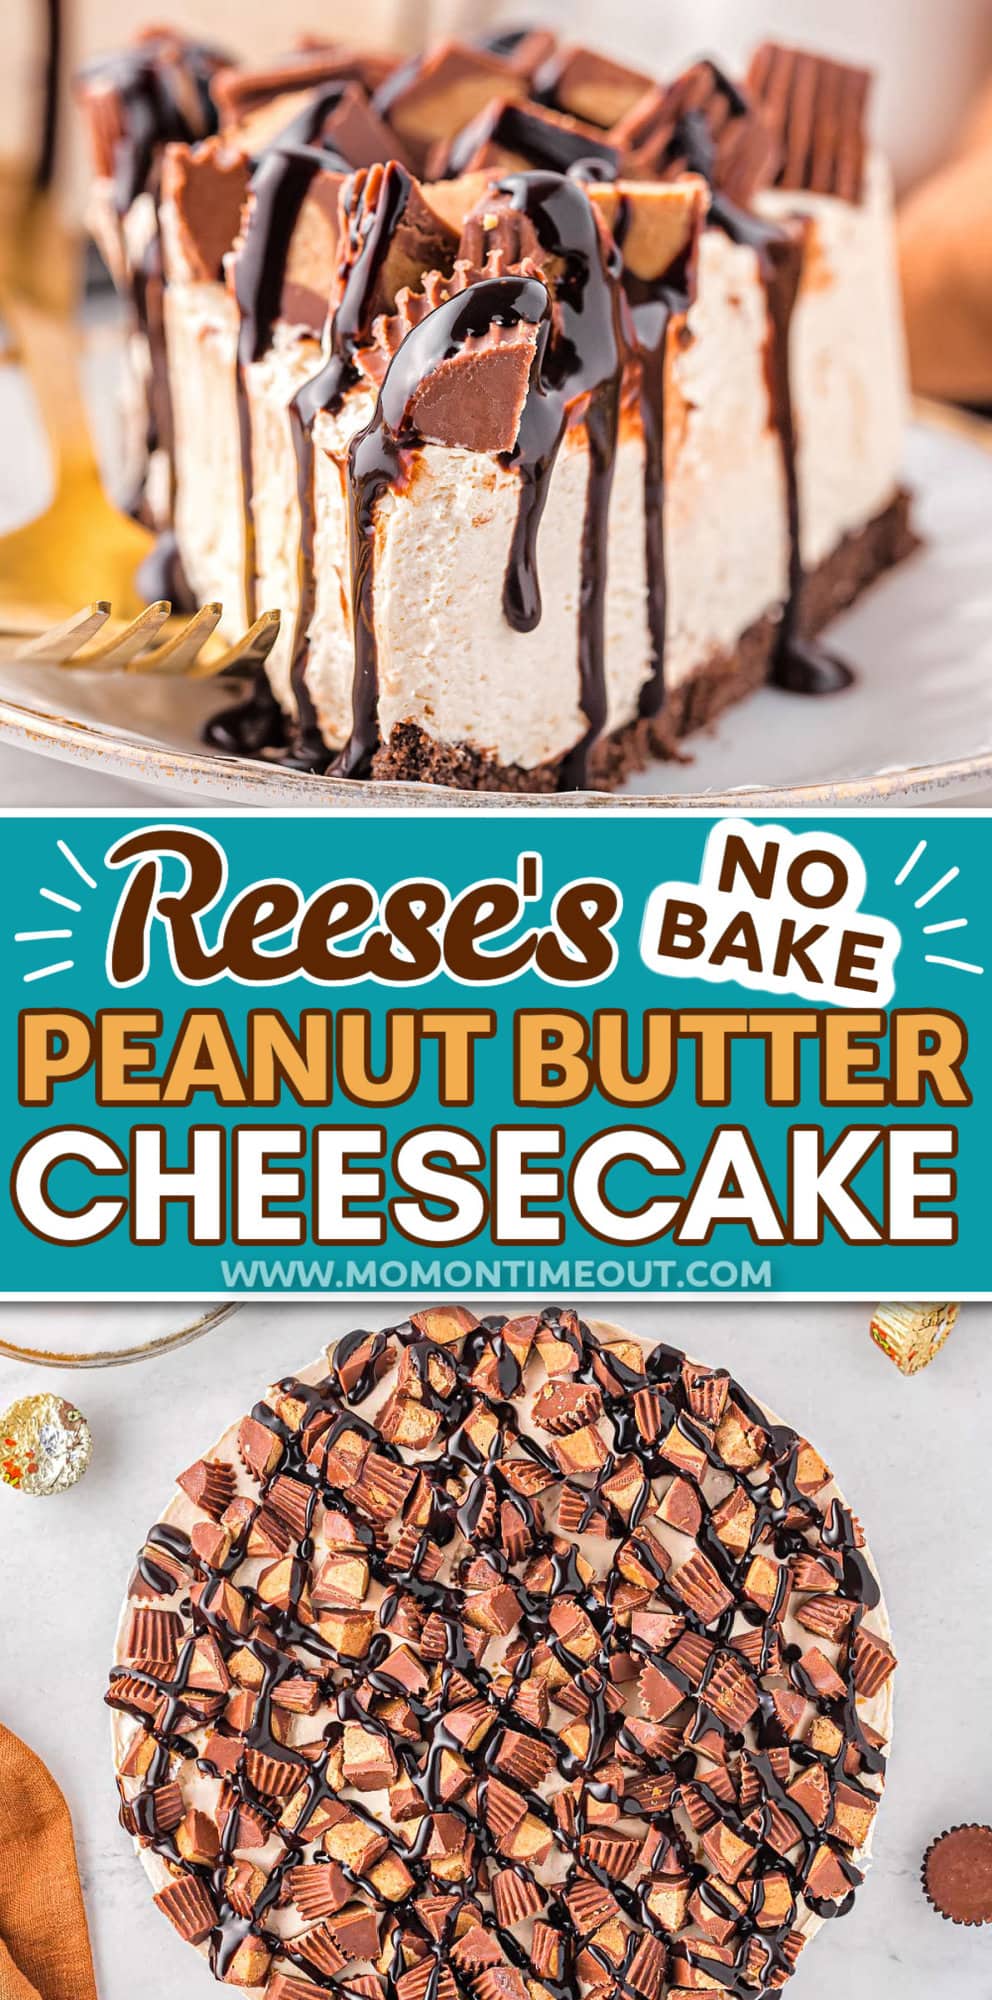 Reese's No Bake Peanut Butter Cheesecake - Mom On Timeout